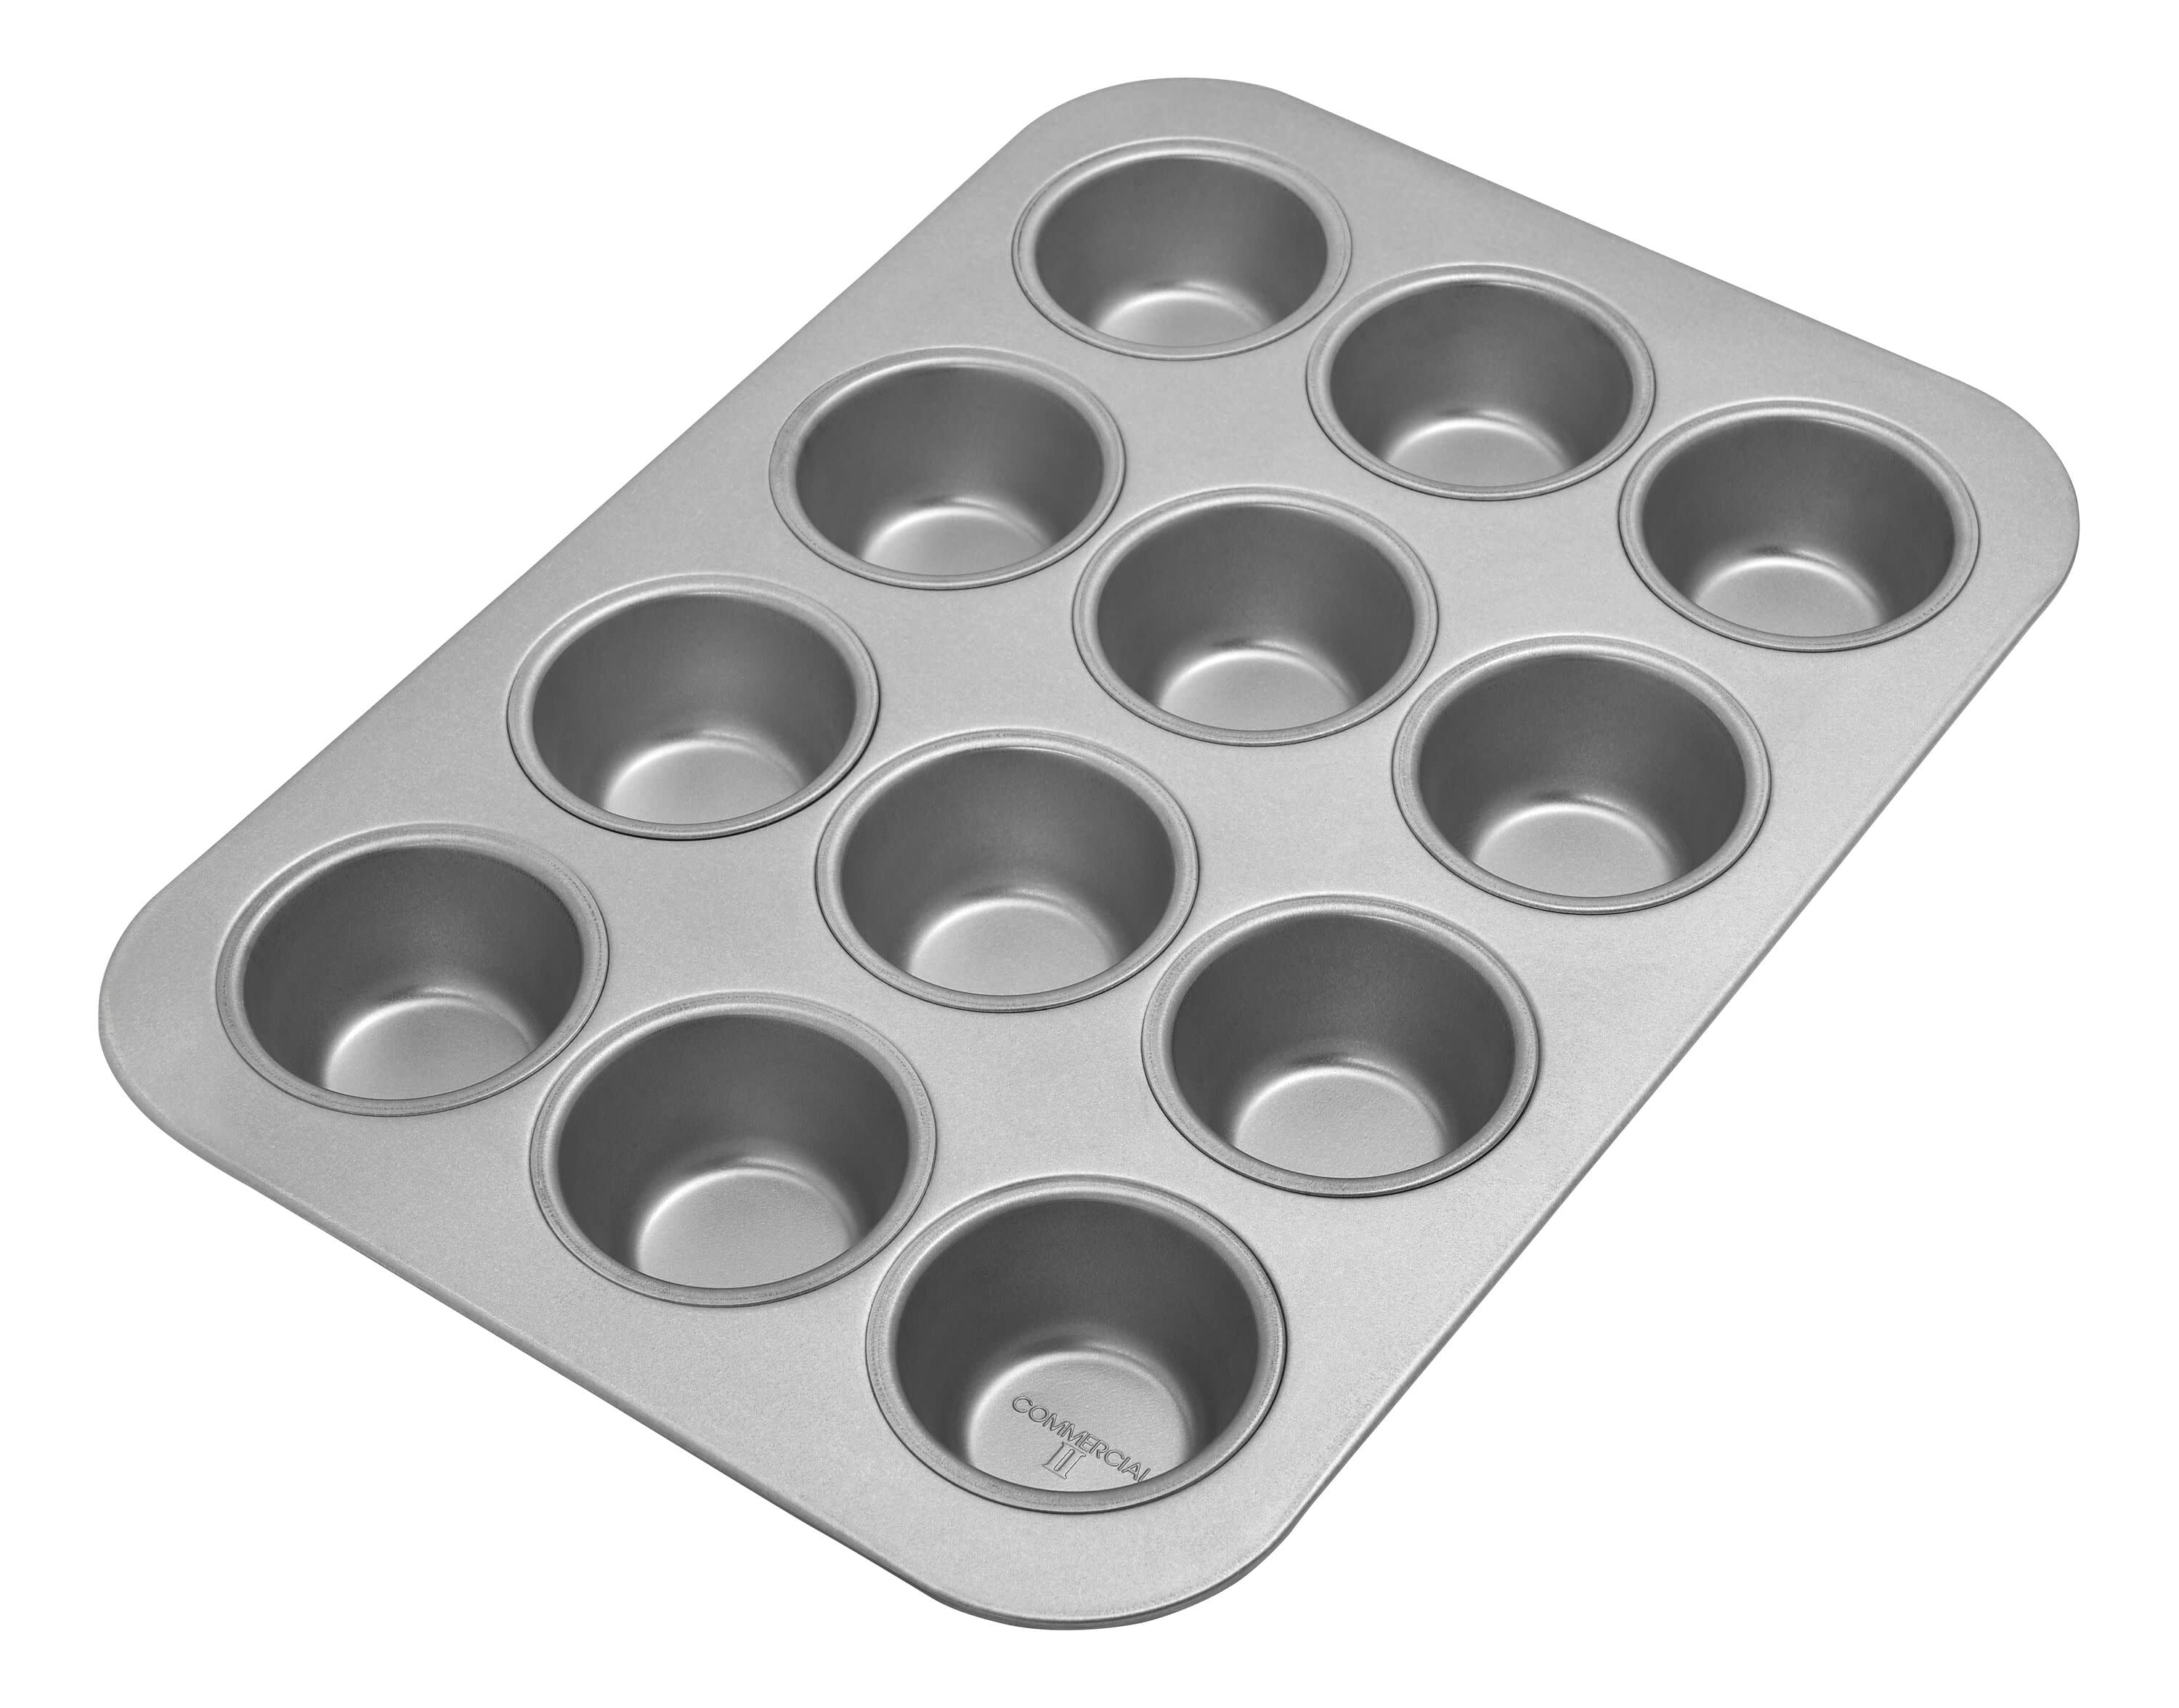 Chicago Metallic Commercial II Uncoated 12-Cup Muffin Pan